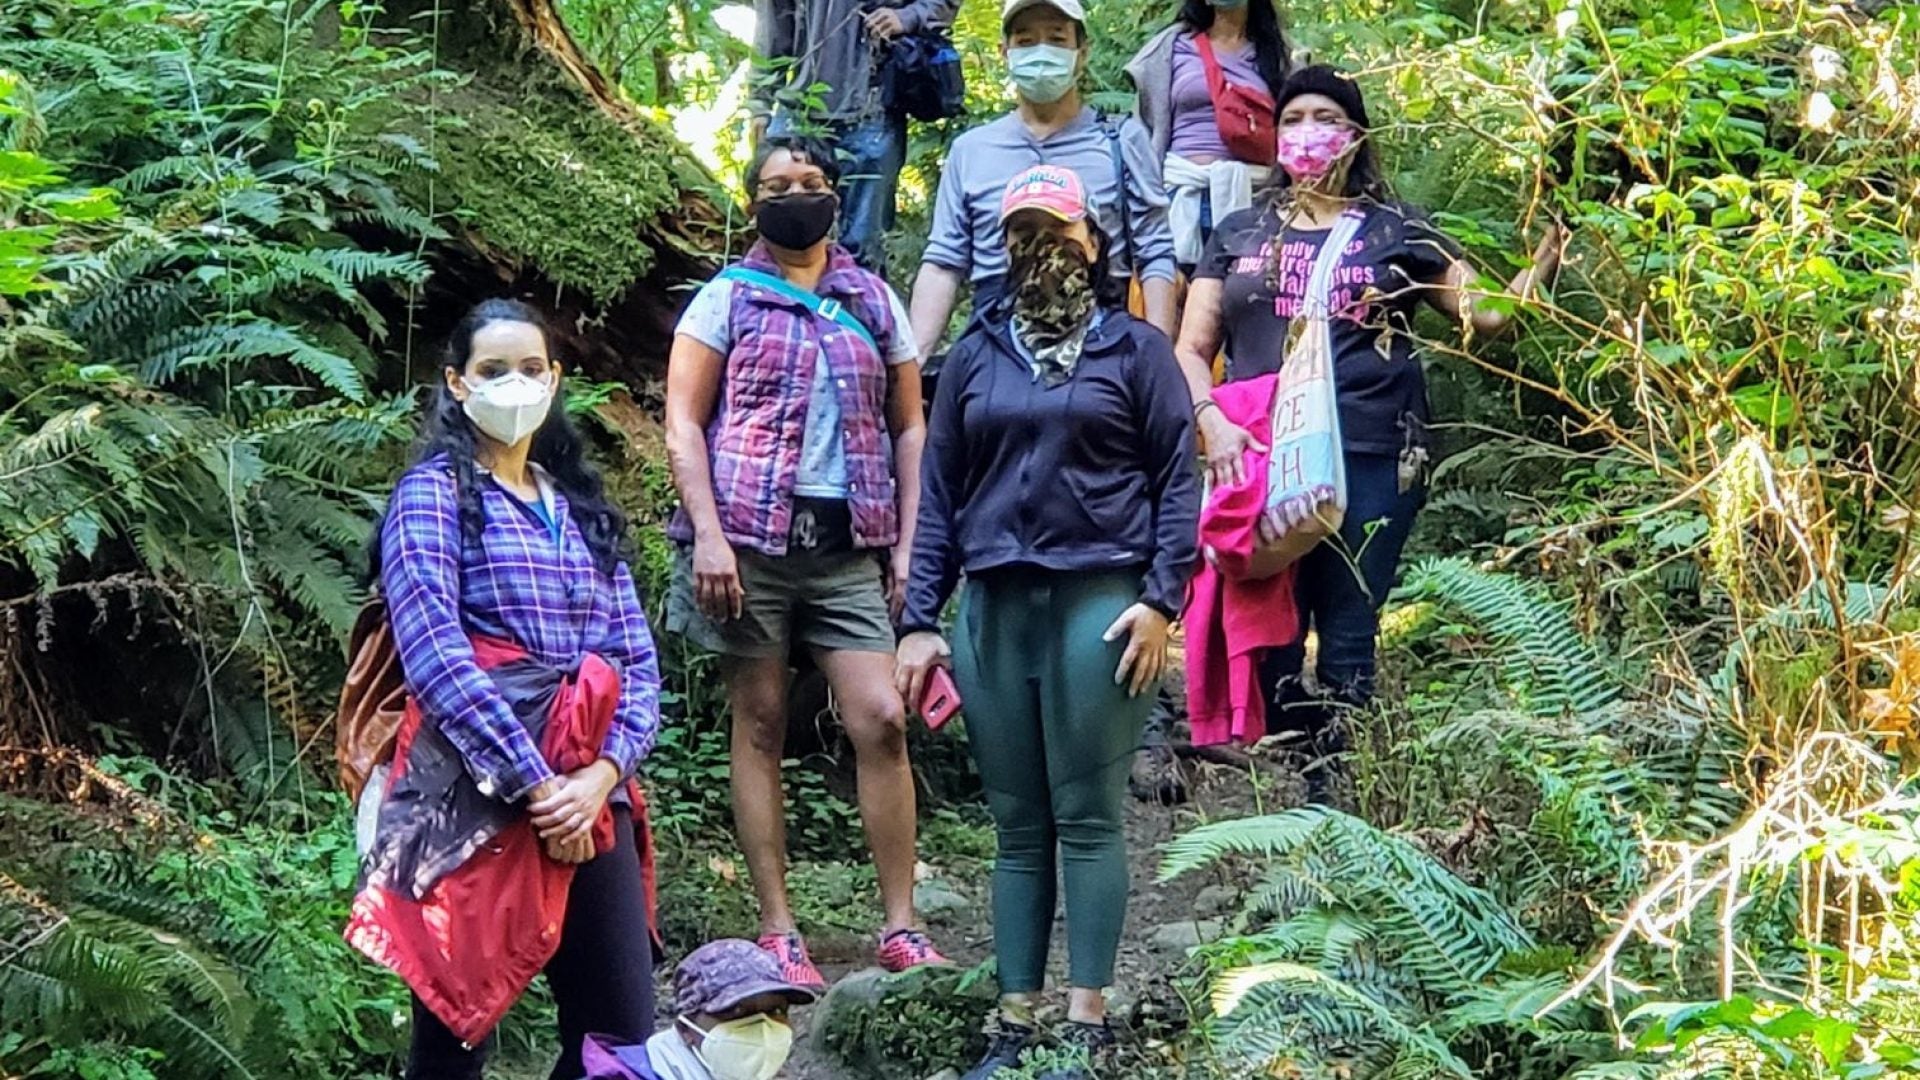 After Experiencing Racism On Portland's Trails, This Woman Started The Hiking Group 'People Of Color Outdoors'